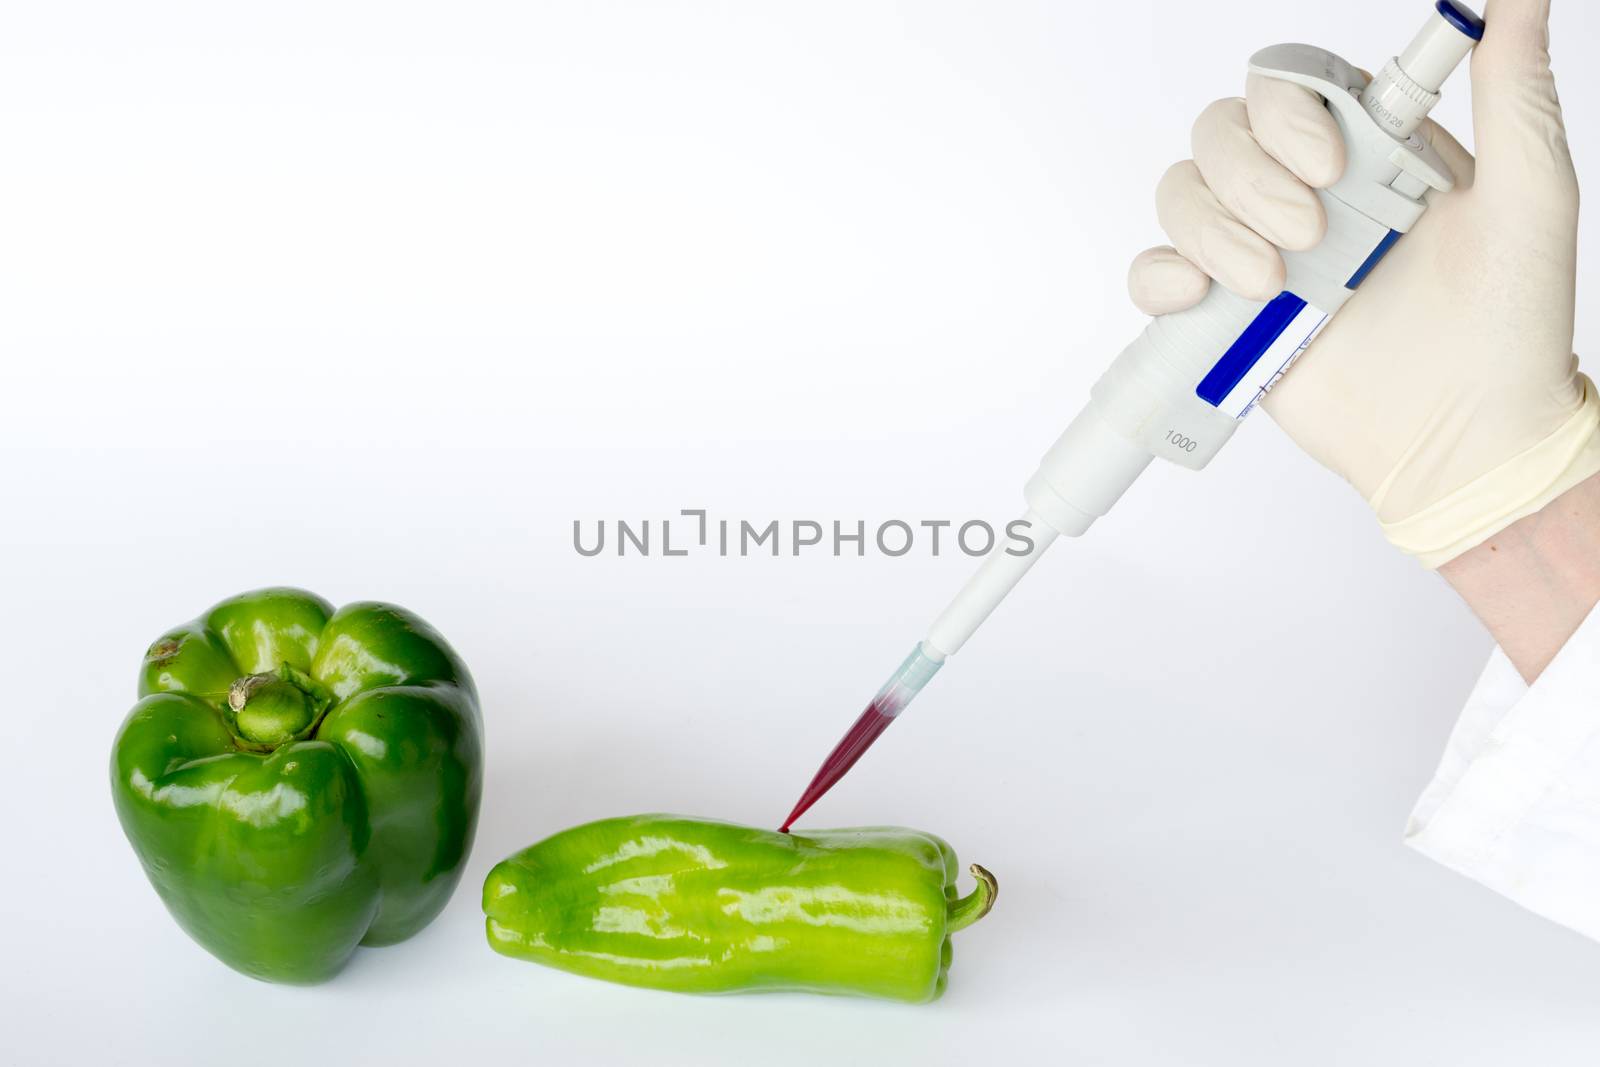 GMO are living organisms whose genetic material has been altered to enhance some qualities over others